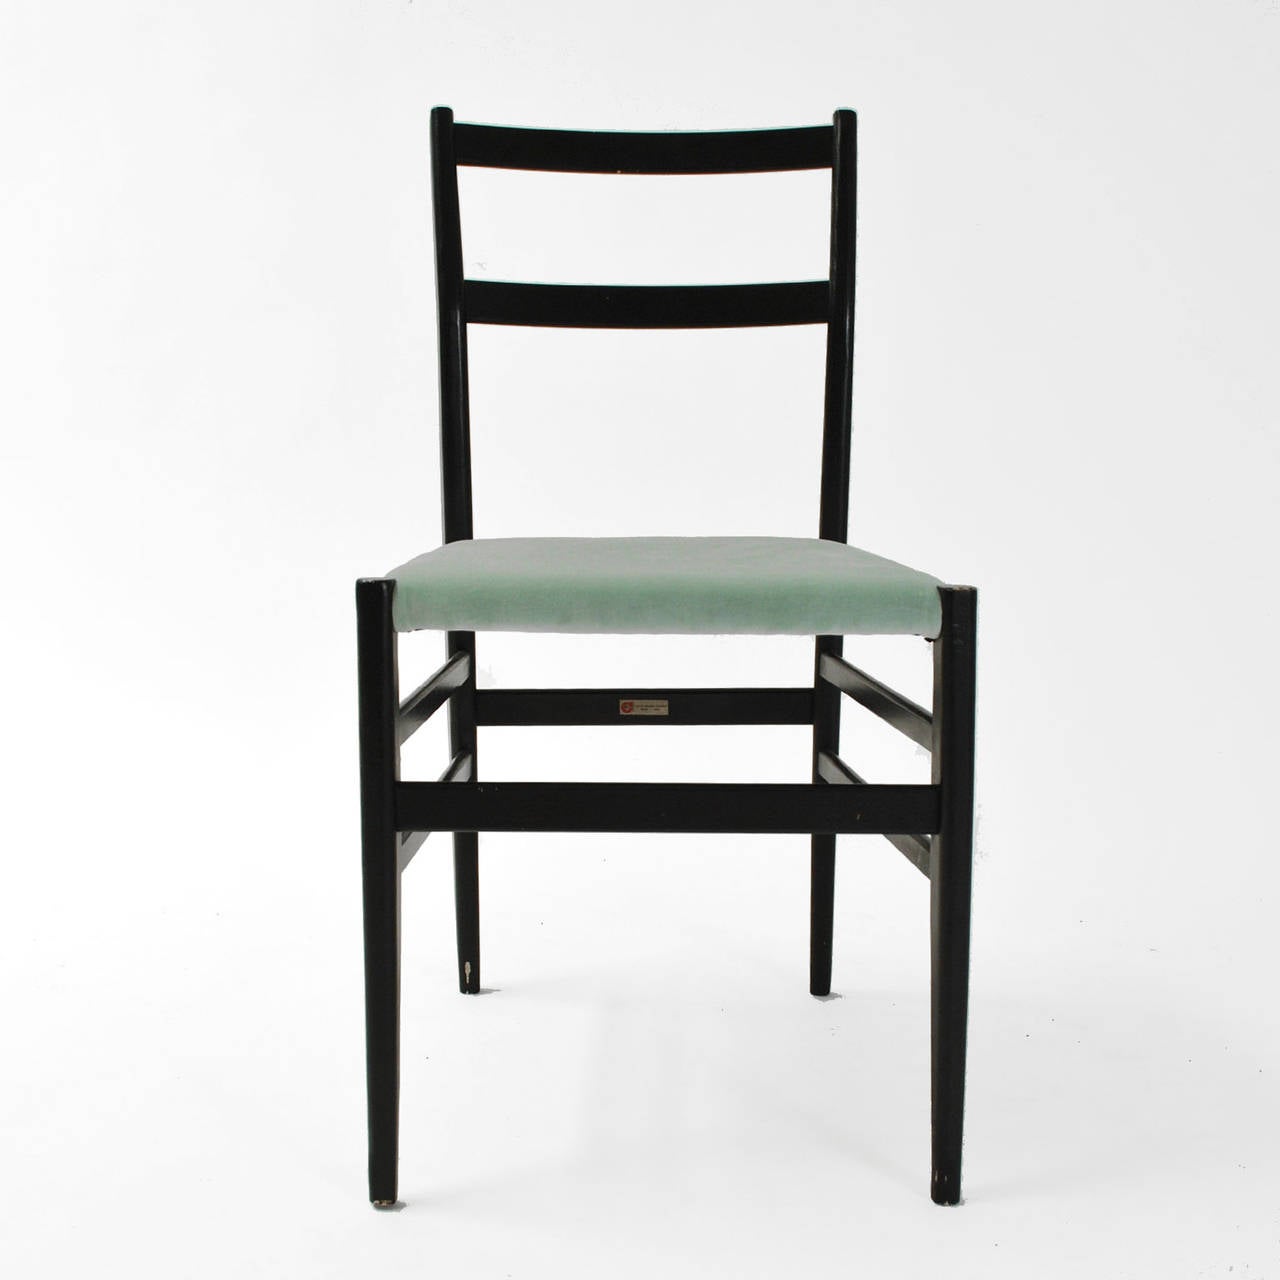 Set of six chairs Leggera model designed by Gio Ponti and edited by Cassina . Made of black lacquered ash wood with seat in green mint velvet cotton. Italy 1950 .